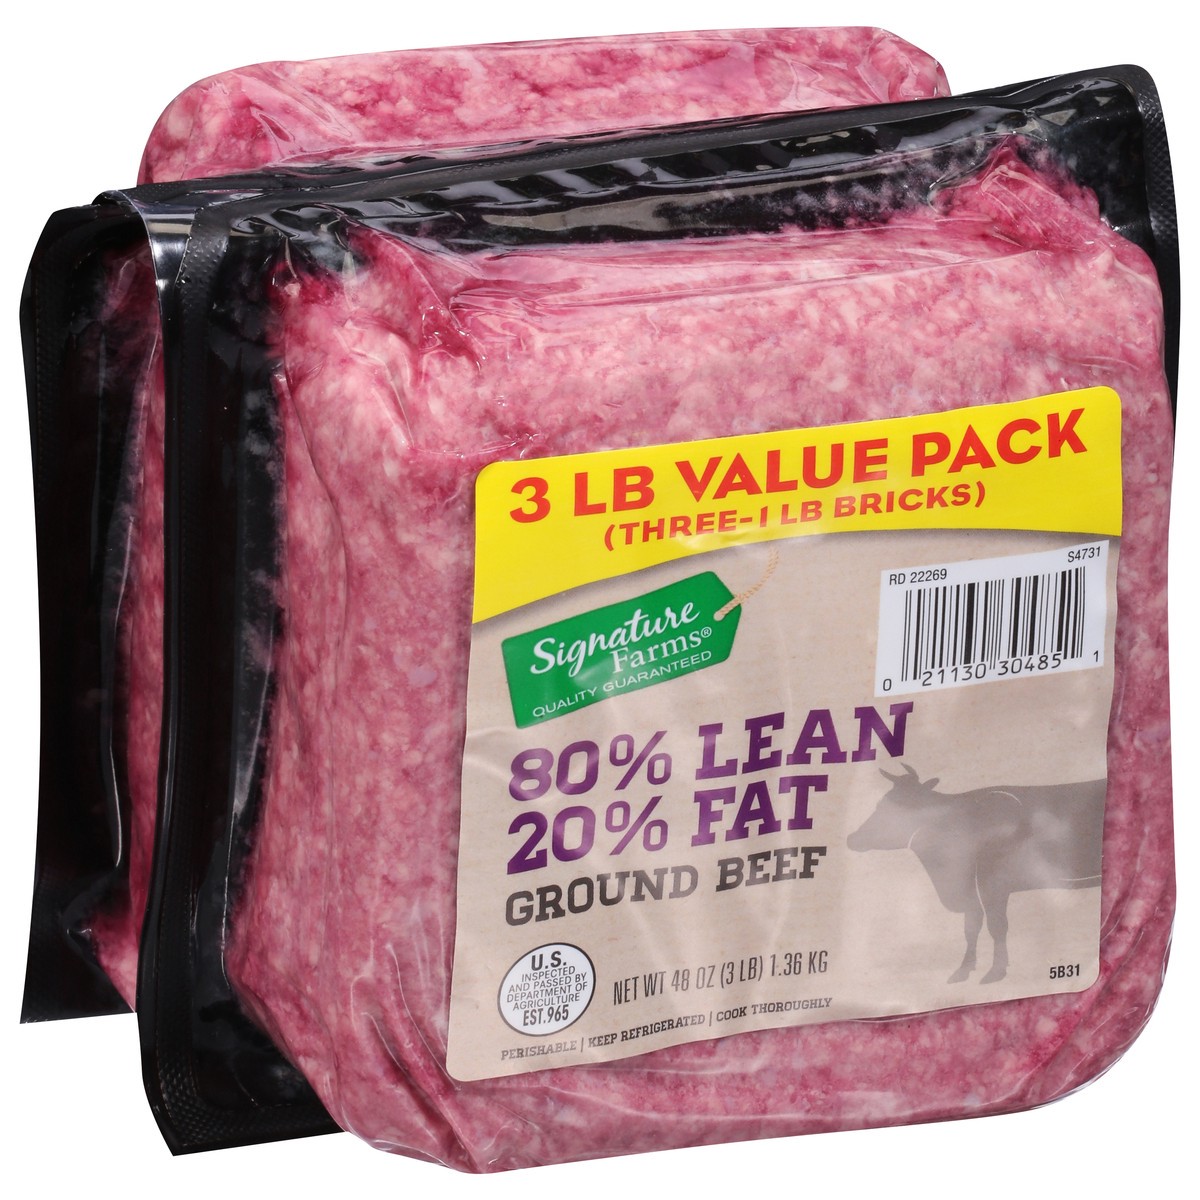 Signature Farms 80 Lean 20 Fat Ground Beef Multipack 48 Oz Shipt